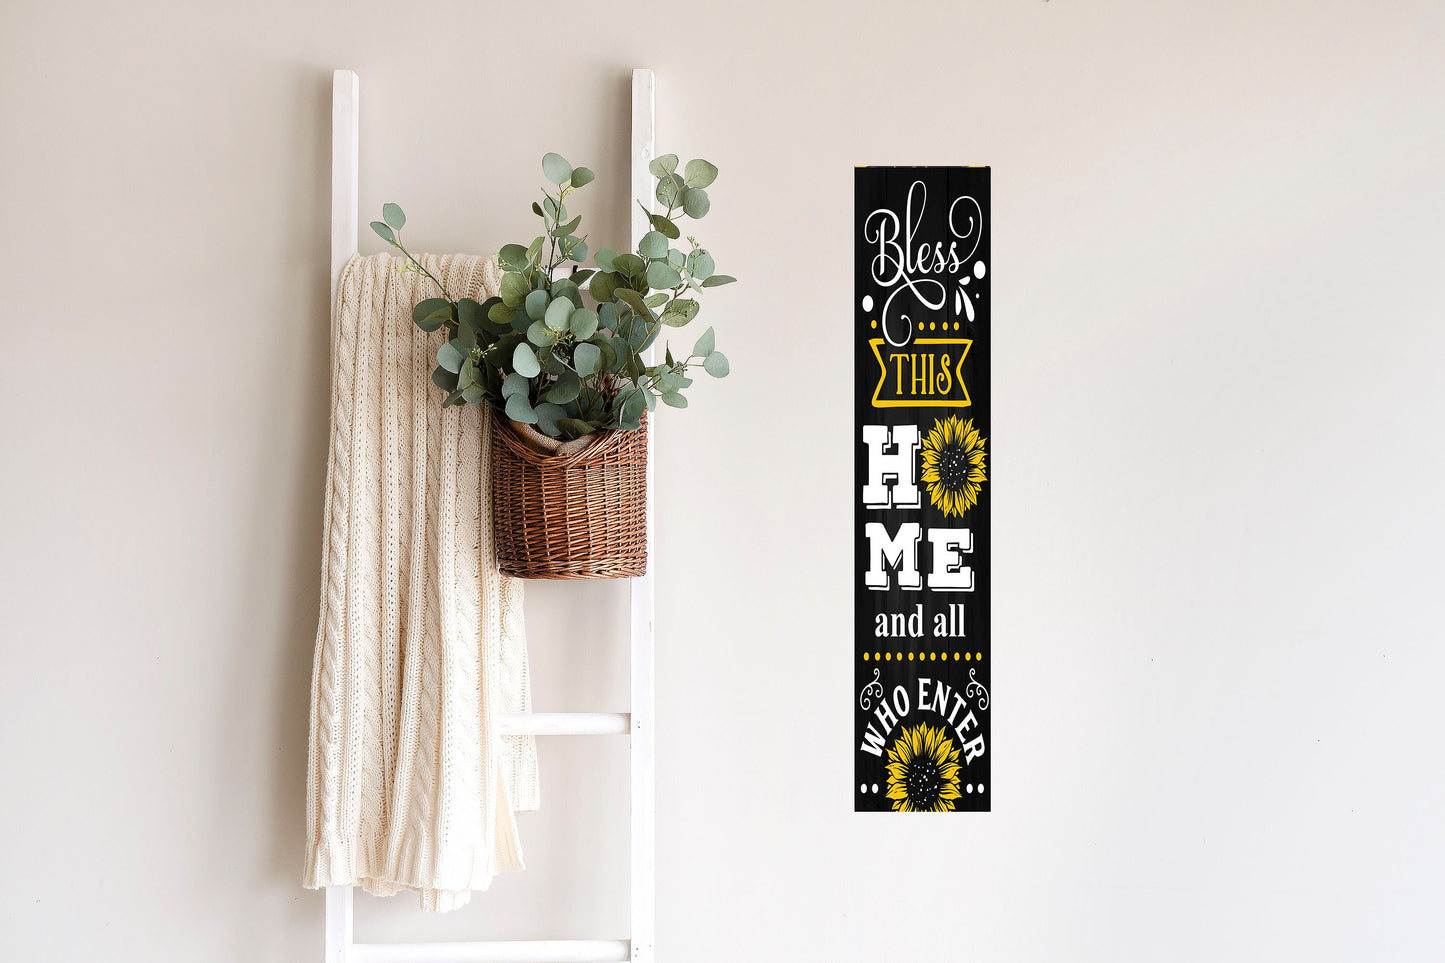 24 Inch (2 Foot Tall) Bless this Home and All Who EnterVertical Wood Print Sign